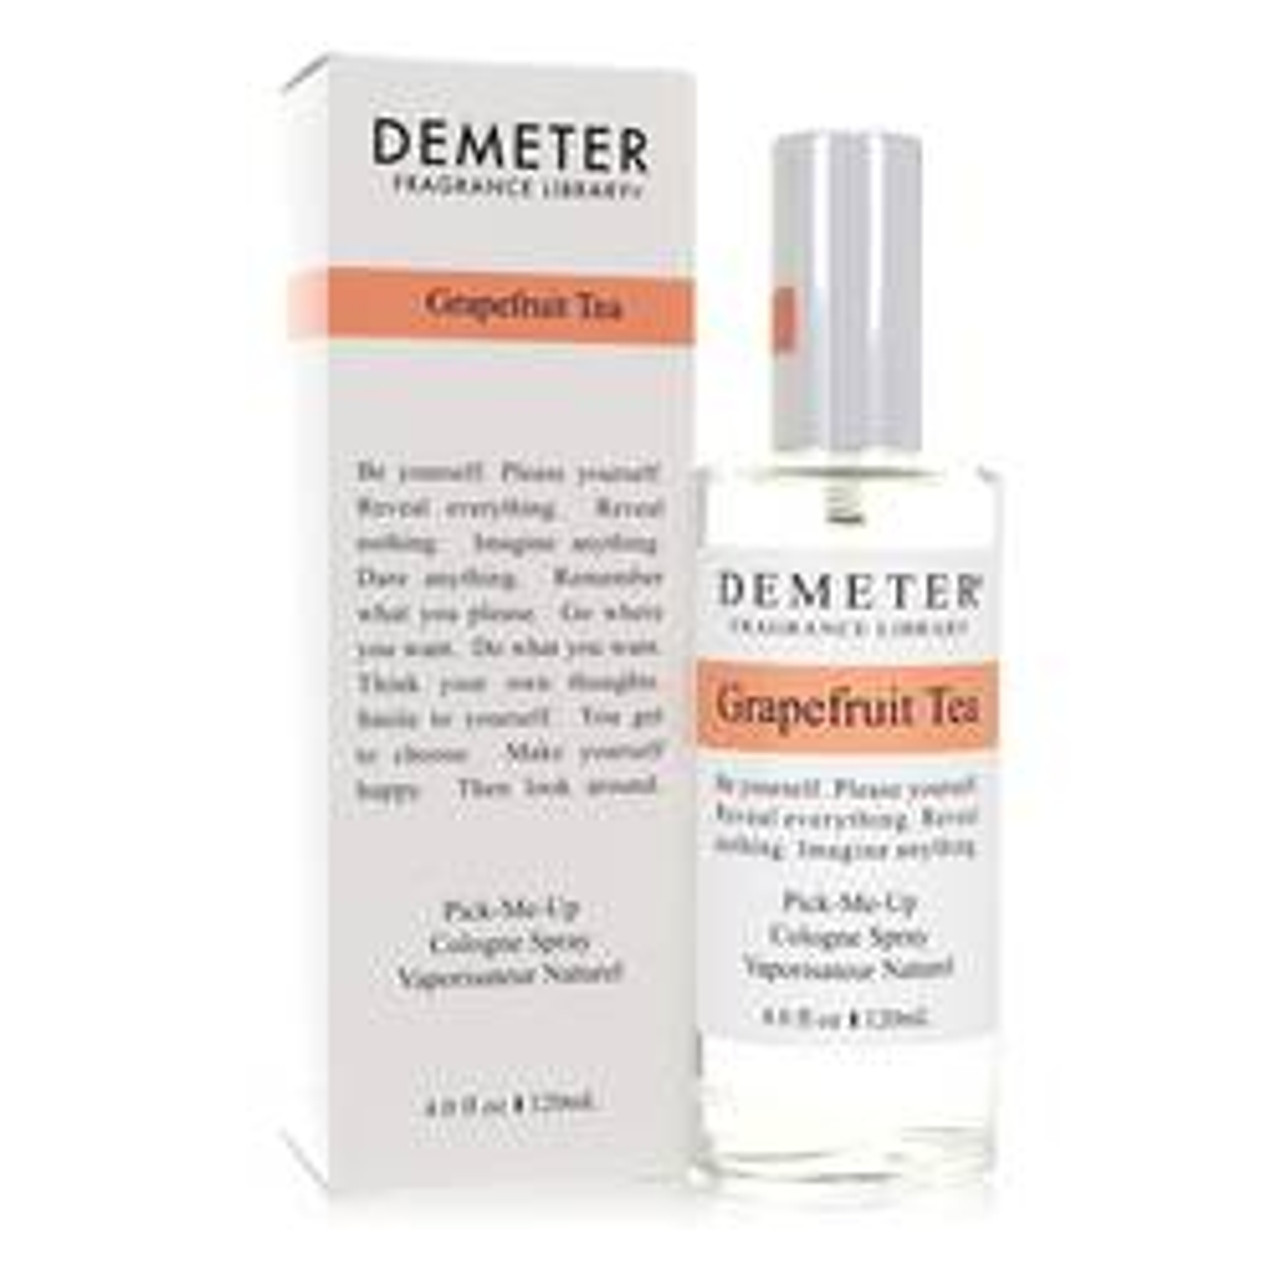 Demeter Grapefruit Tea Perfume By Demeter Cologne Spray 4 oz for Women - [From 79.50 - Choose pk Qty ] - *Ships from Miami